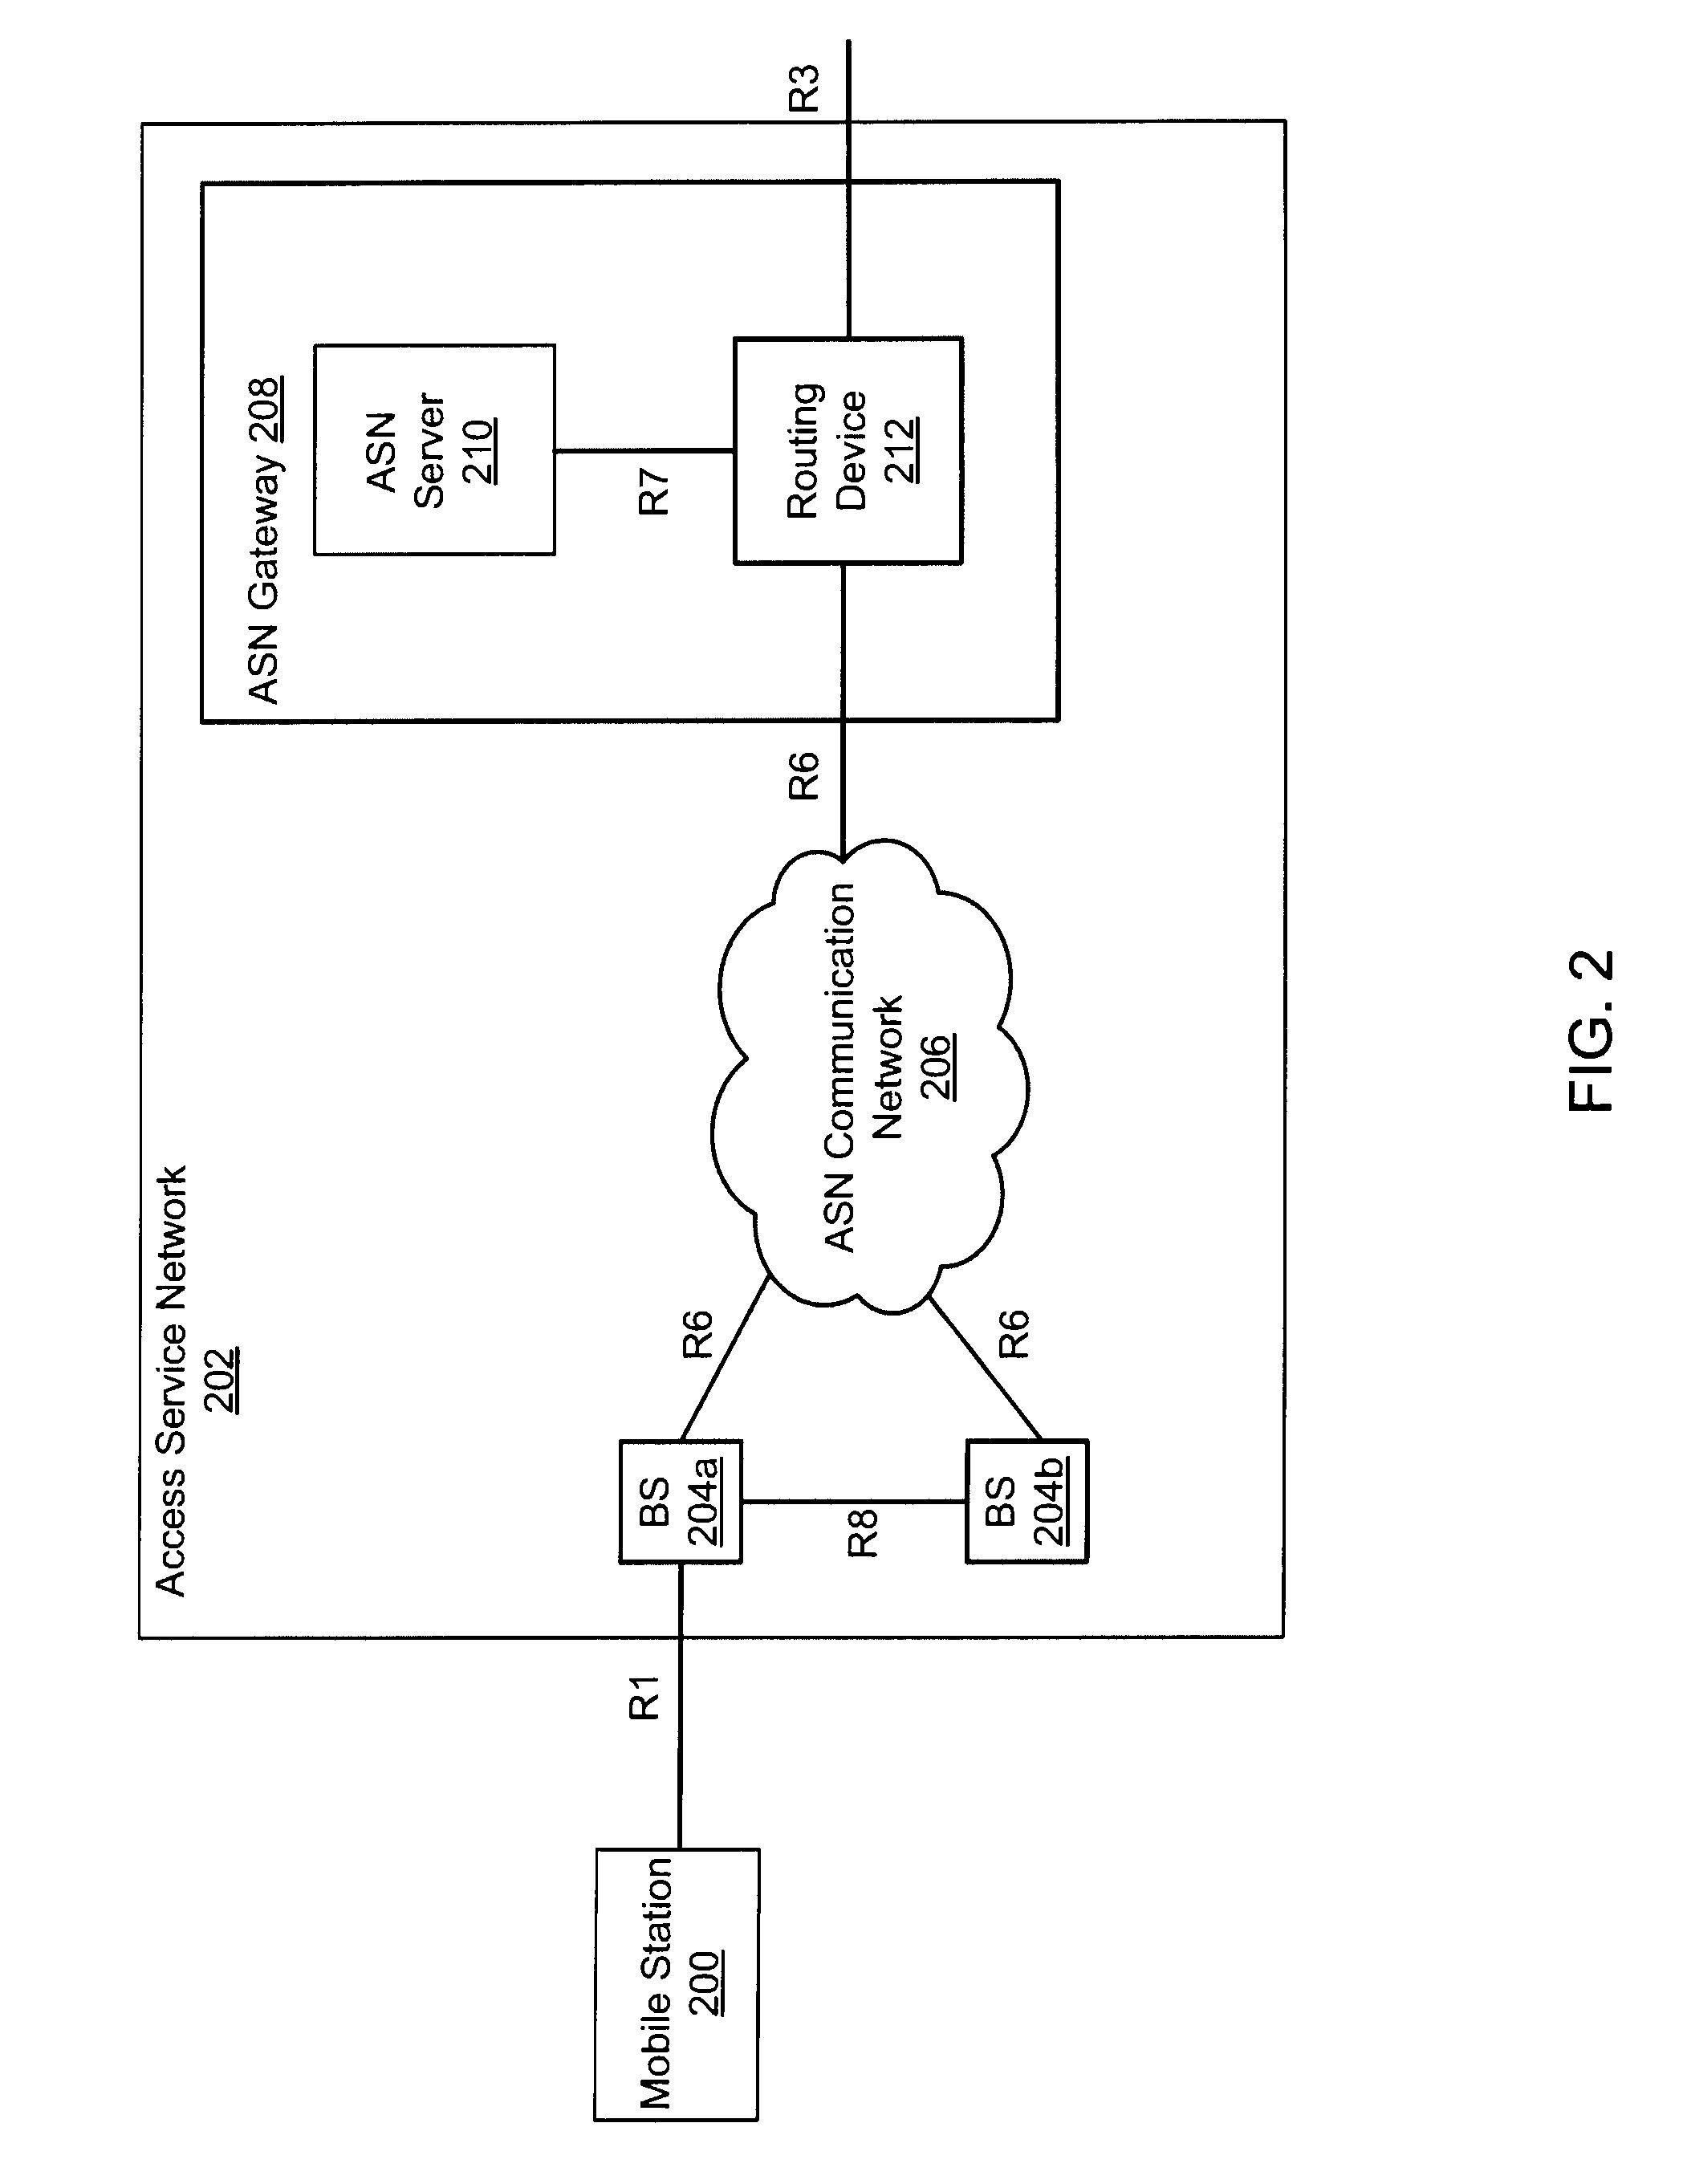 Systems and Methods for Fractional Routing Redundancy